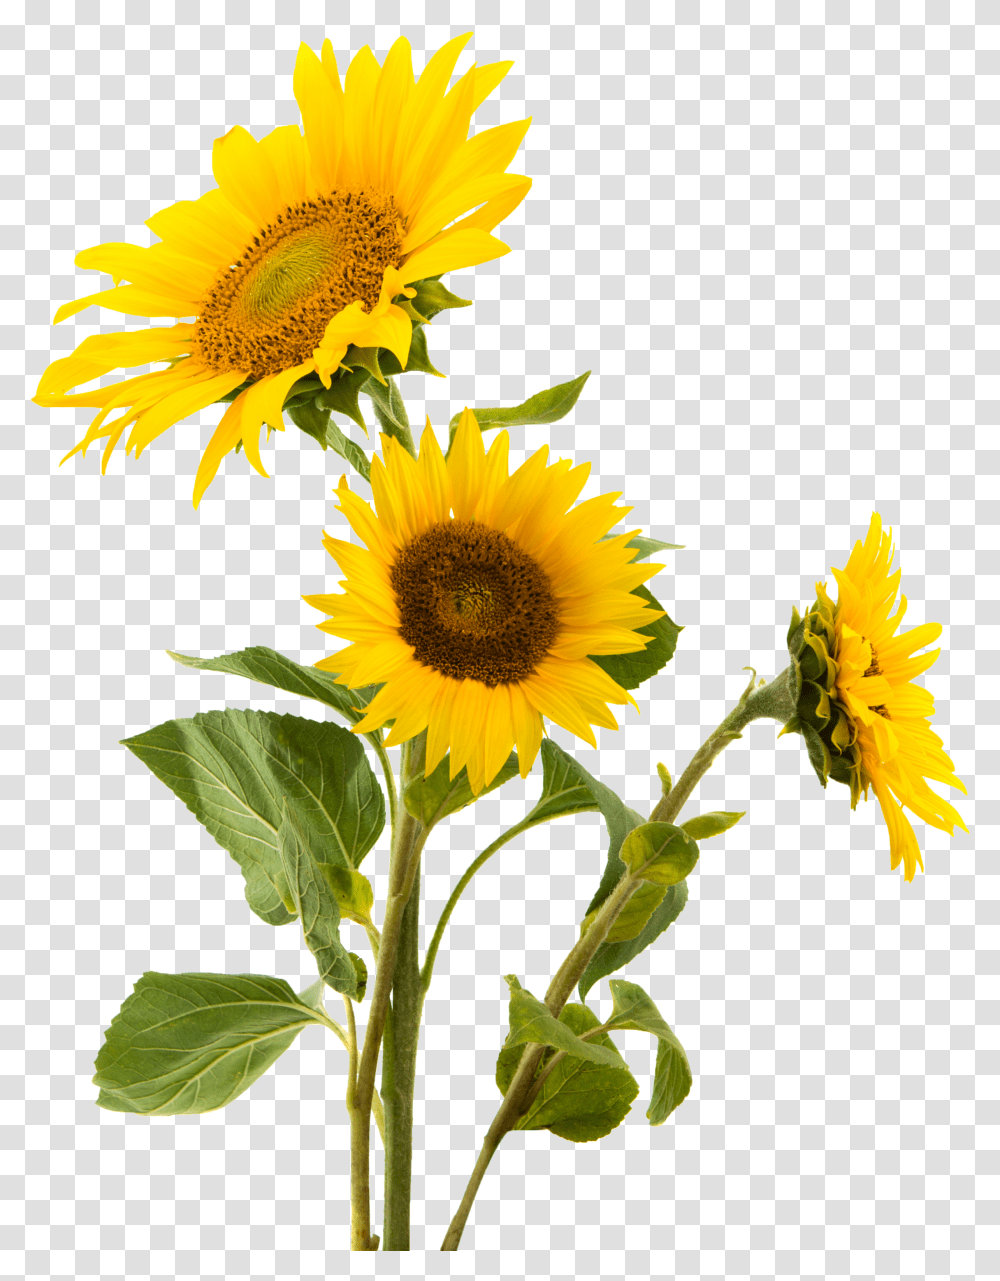 Snack Gluten Sunflower Nut Seed Sunflowers Common Clipart Sunflower Transparent Png